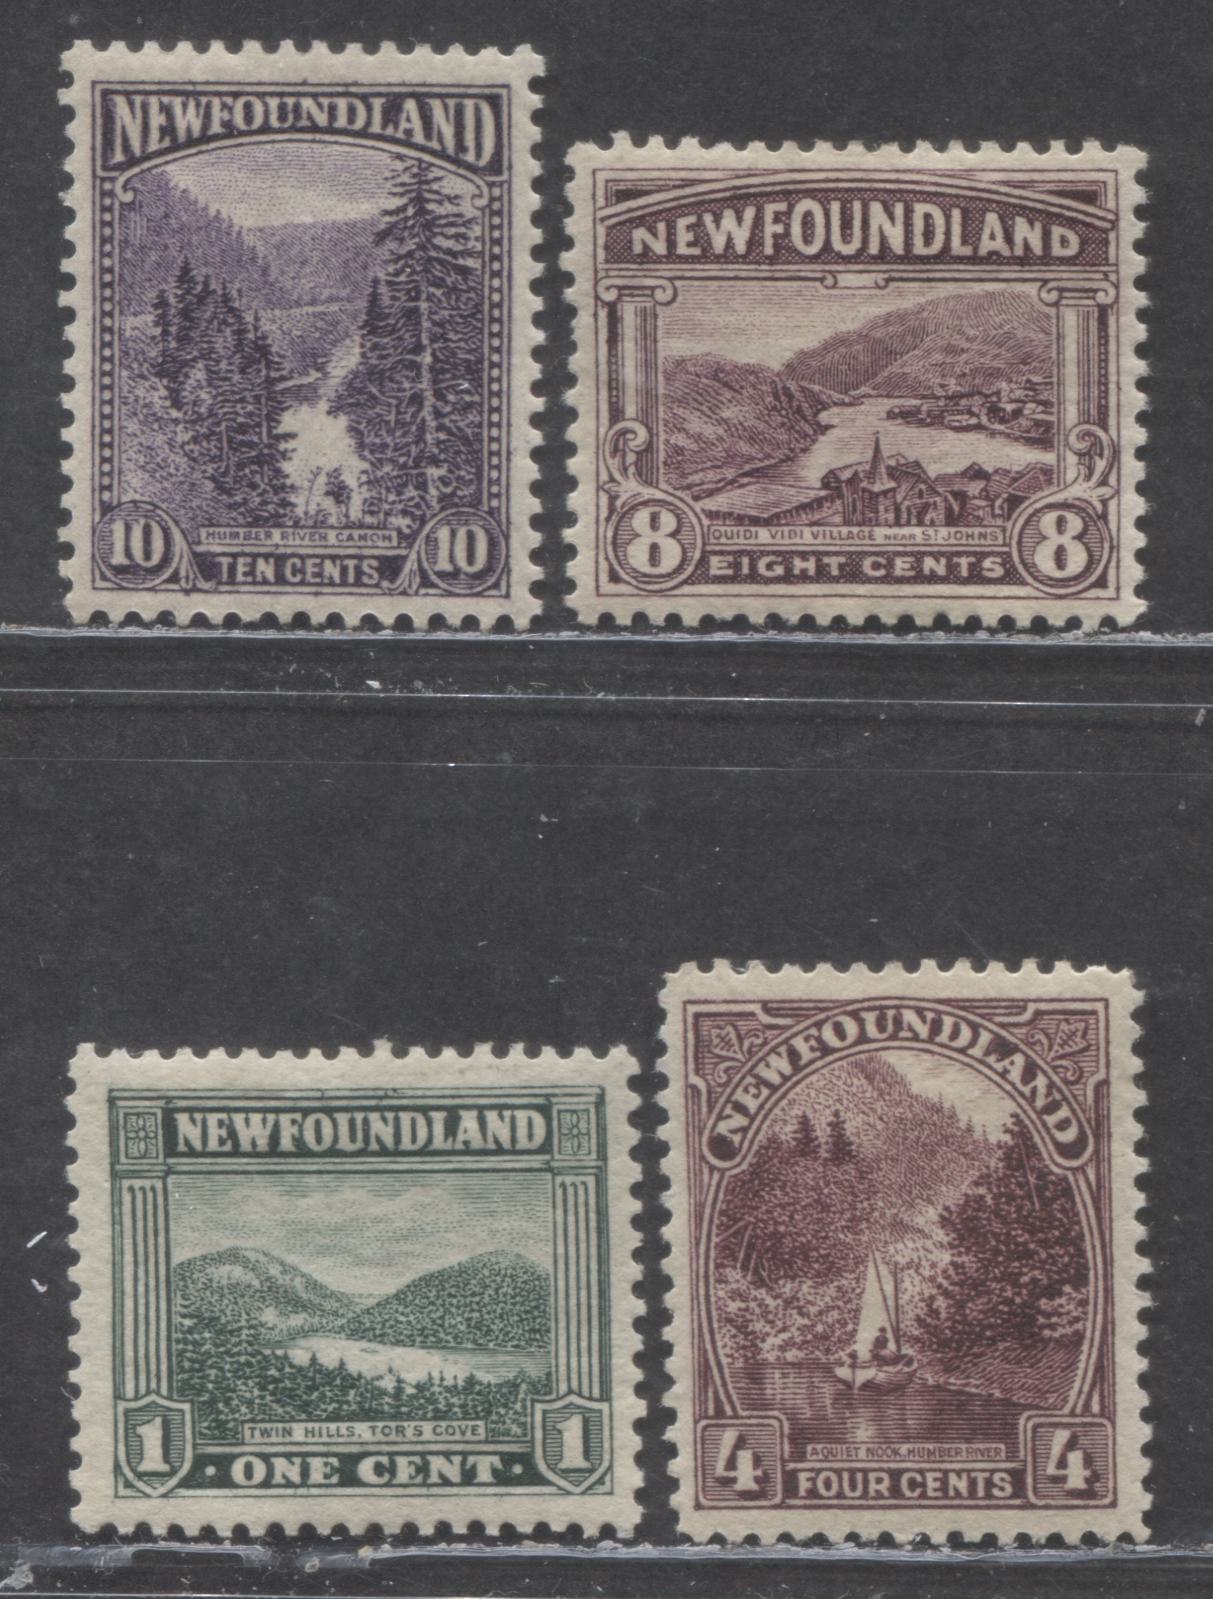 Lot 181 Newfoundland #131, 134, 137, 139 1c - 10c Gray Green - Dark Violet Twin Hills - Humber River Canyon, 1923-1924 Pictorial Issue, 4 VFOG Singles, Line And Comb Perfs